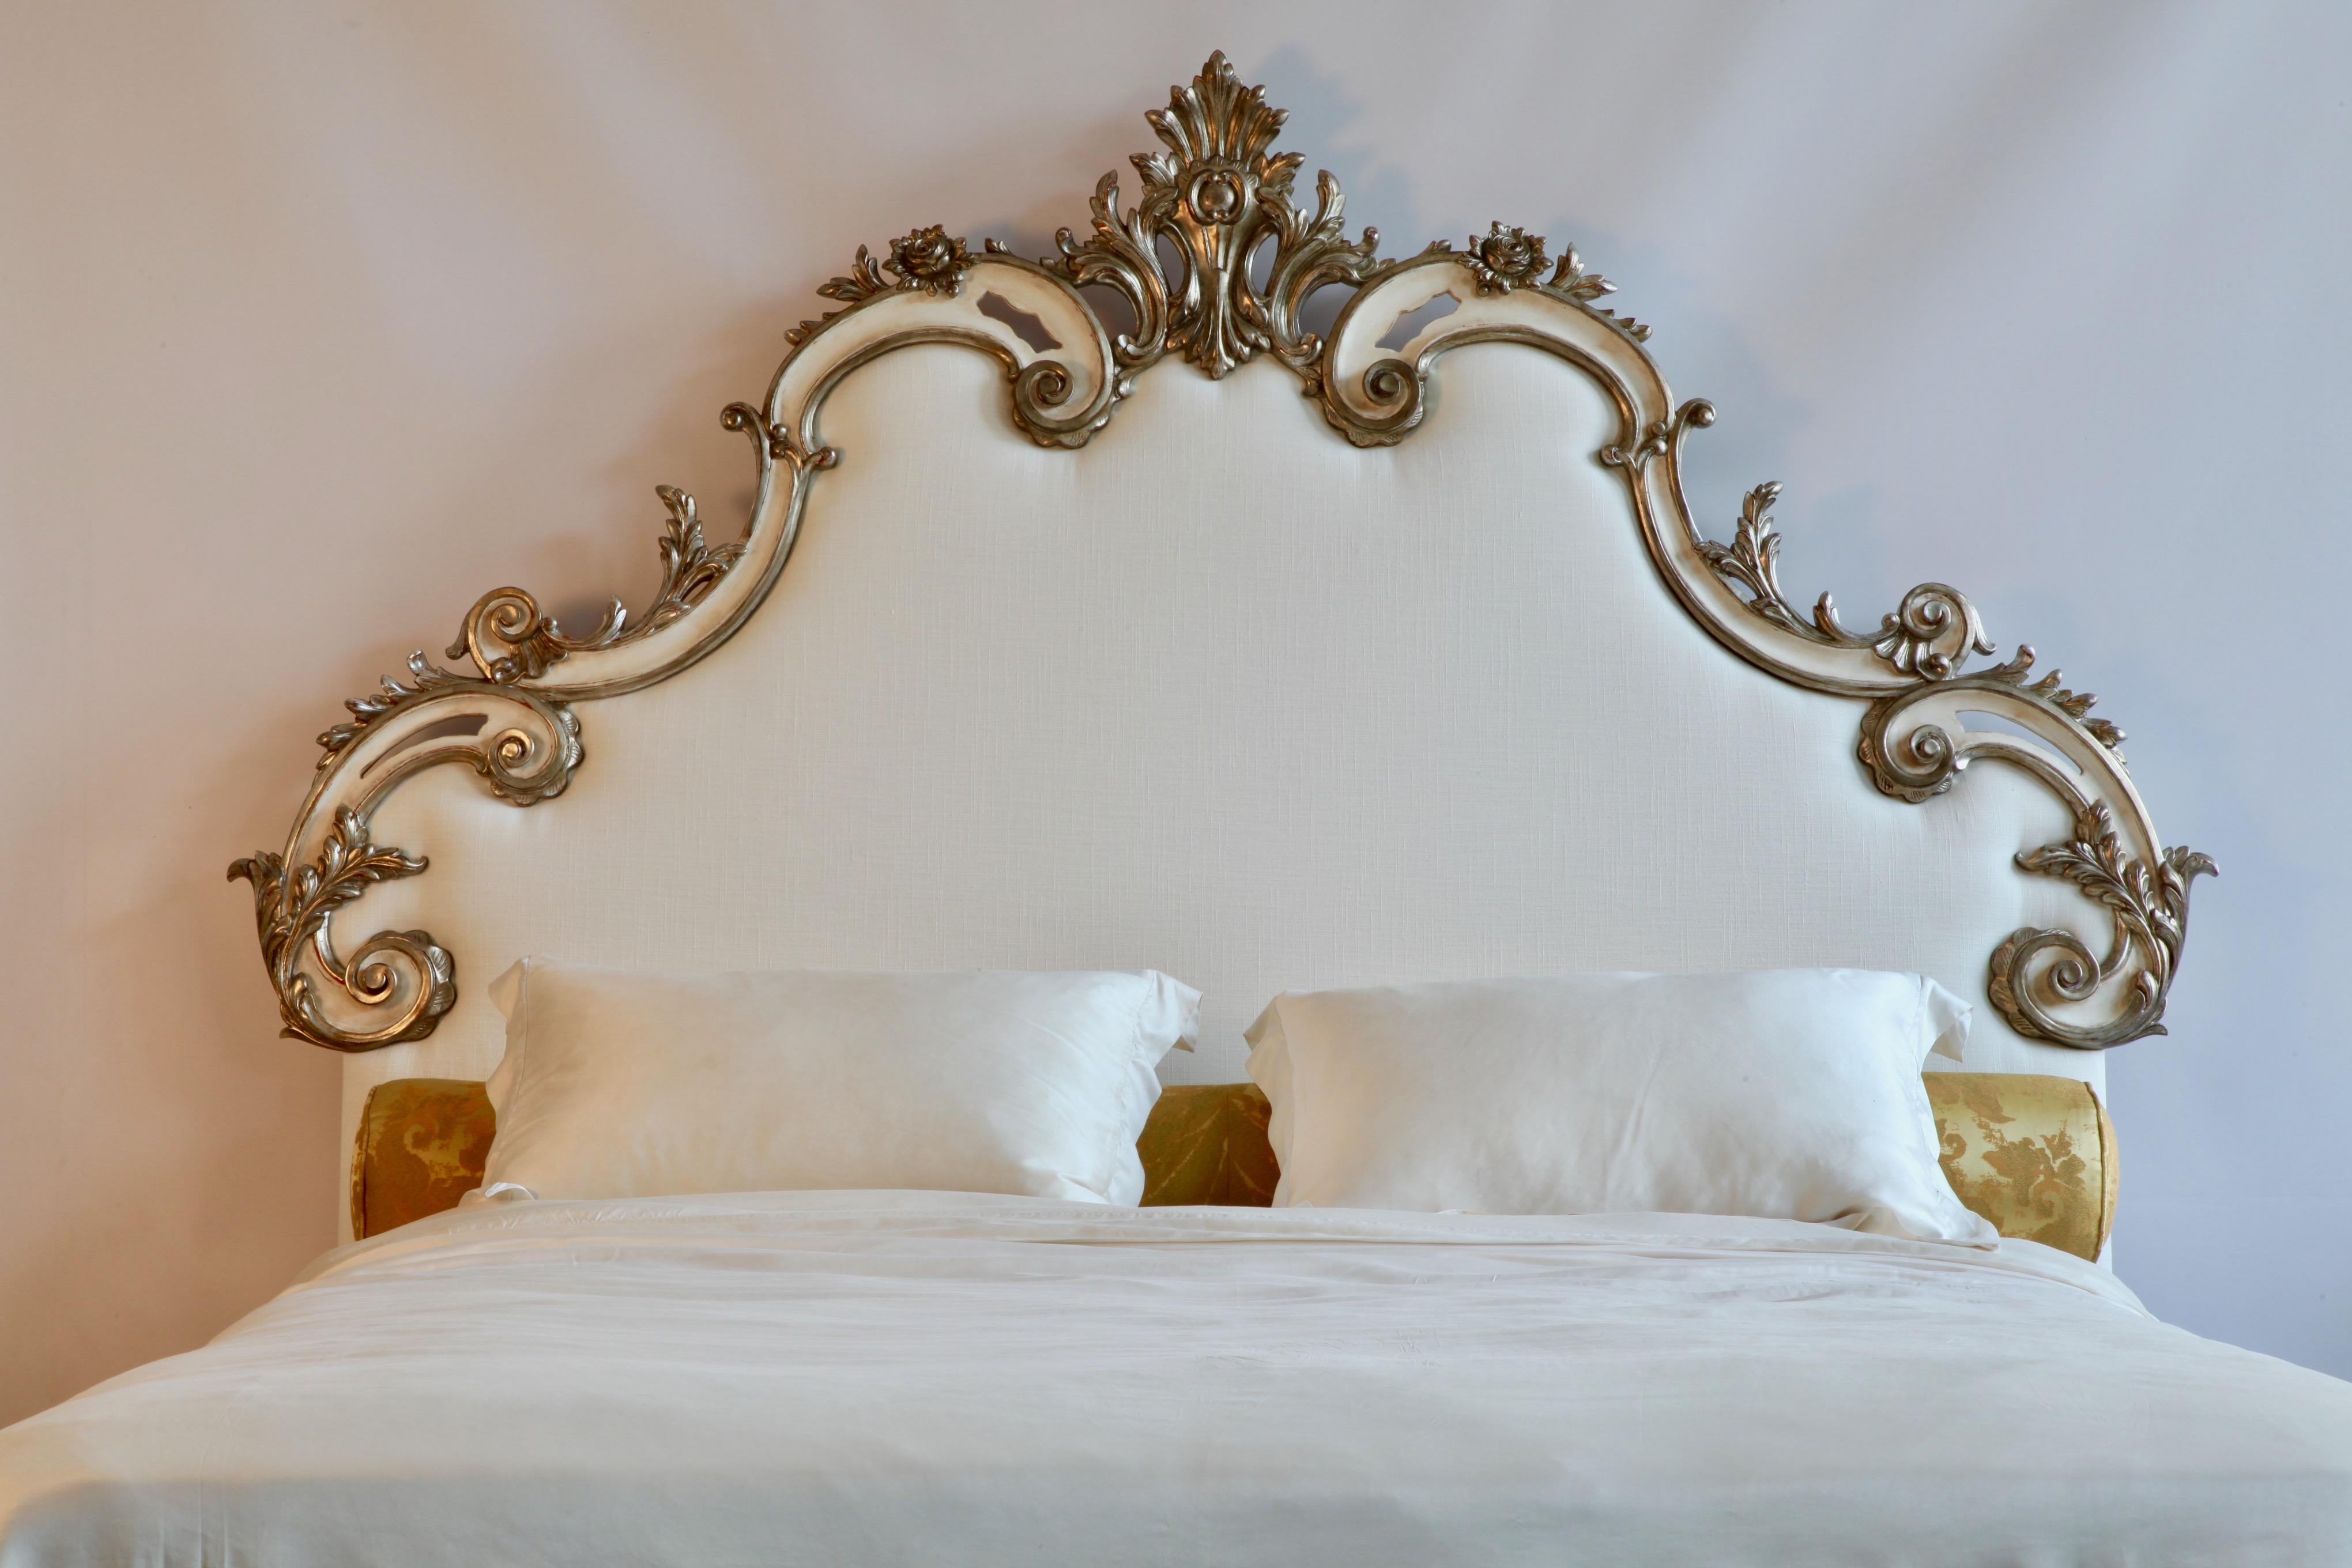 Hand carved Rococo headboard finished in an old, taupe, white patina, enhanced by hand gilded, silver highlights. The carving consists of sweeping, deep scrolled, 's' curves and decoratively carved accents of the stylised acanthus leaf.